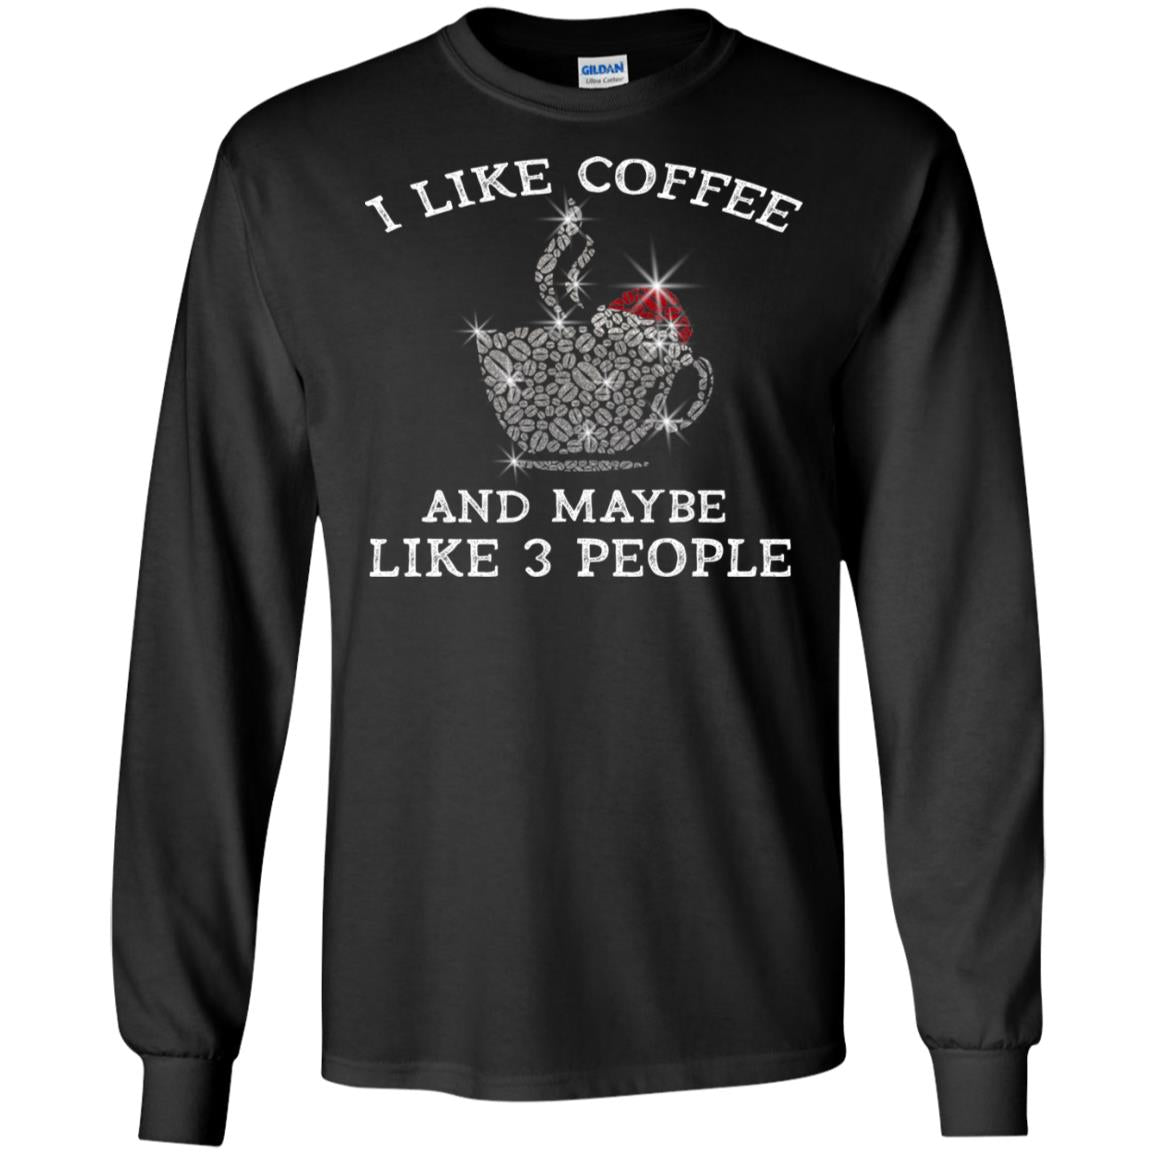 I Like Coffee And Maybe Like 3 People Best Quote Tshirt For Coffee LoversG240 Gildan LS Ultra Cotton T-Shirt